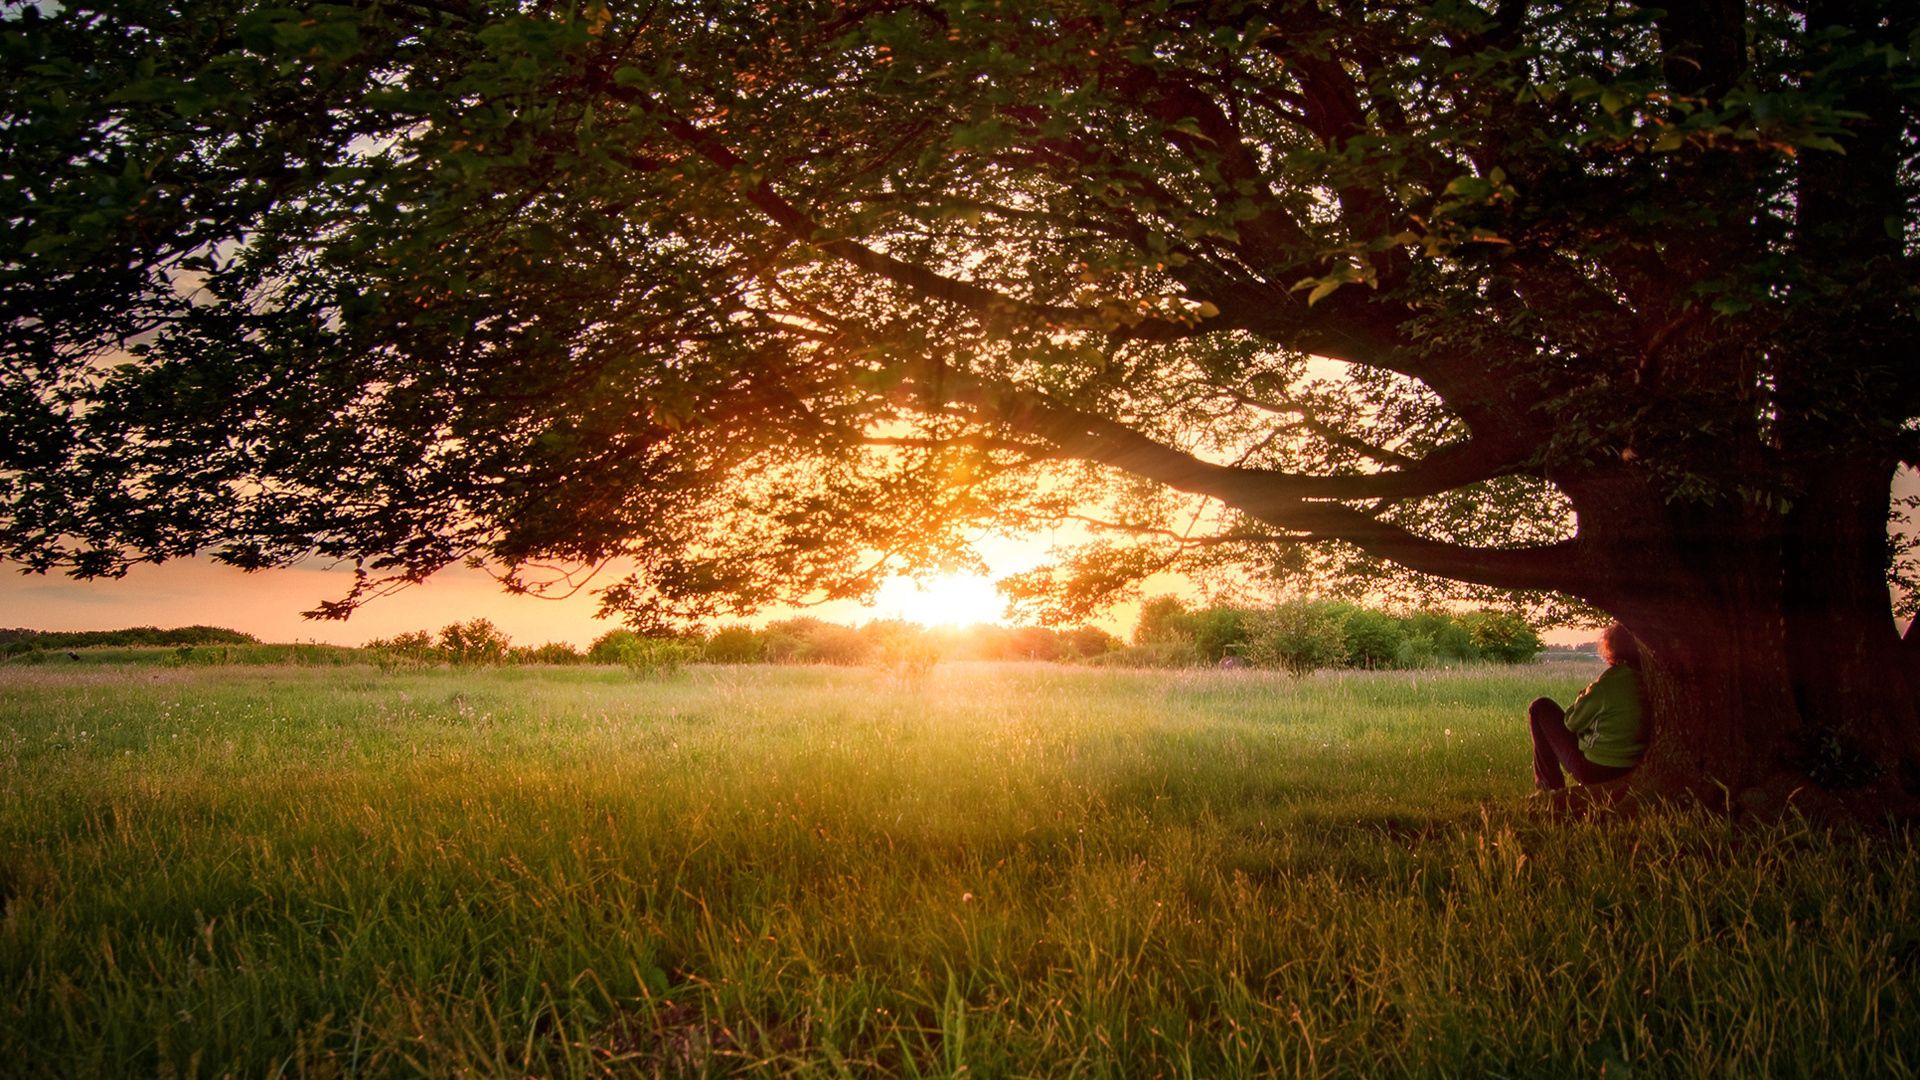 field, nature, sunset, wood, tree, krone, crown, branches, branch, evening, human, person, scattered, dreams, reverie, spreading Full HD